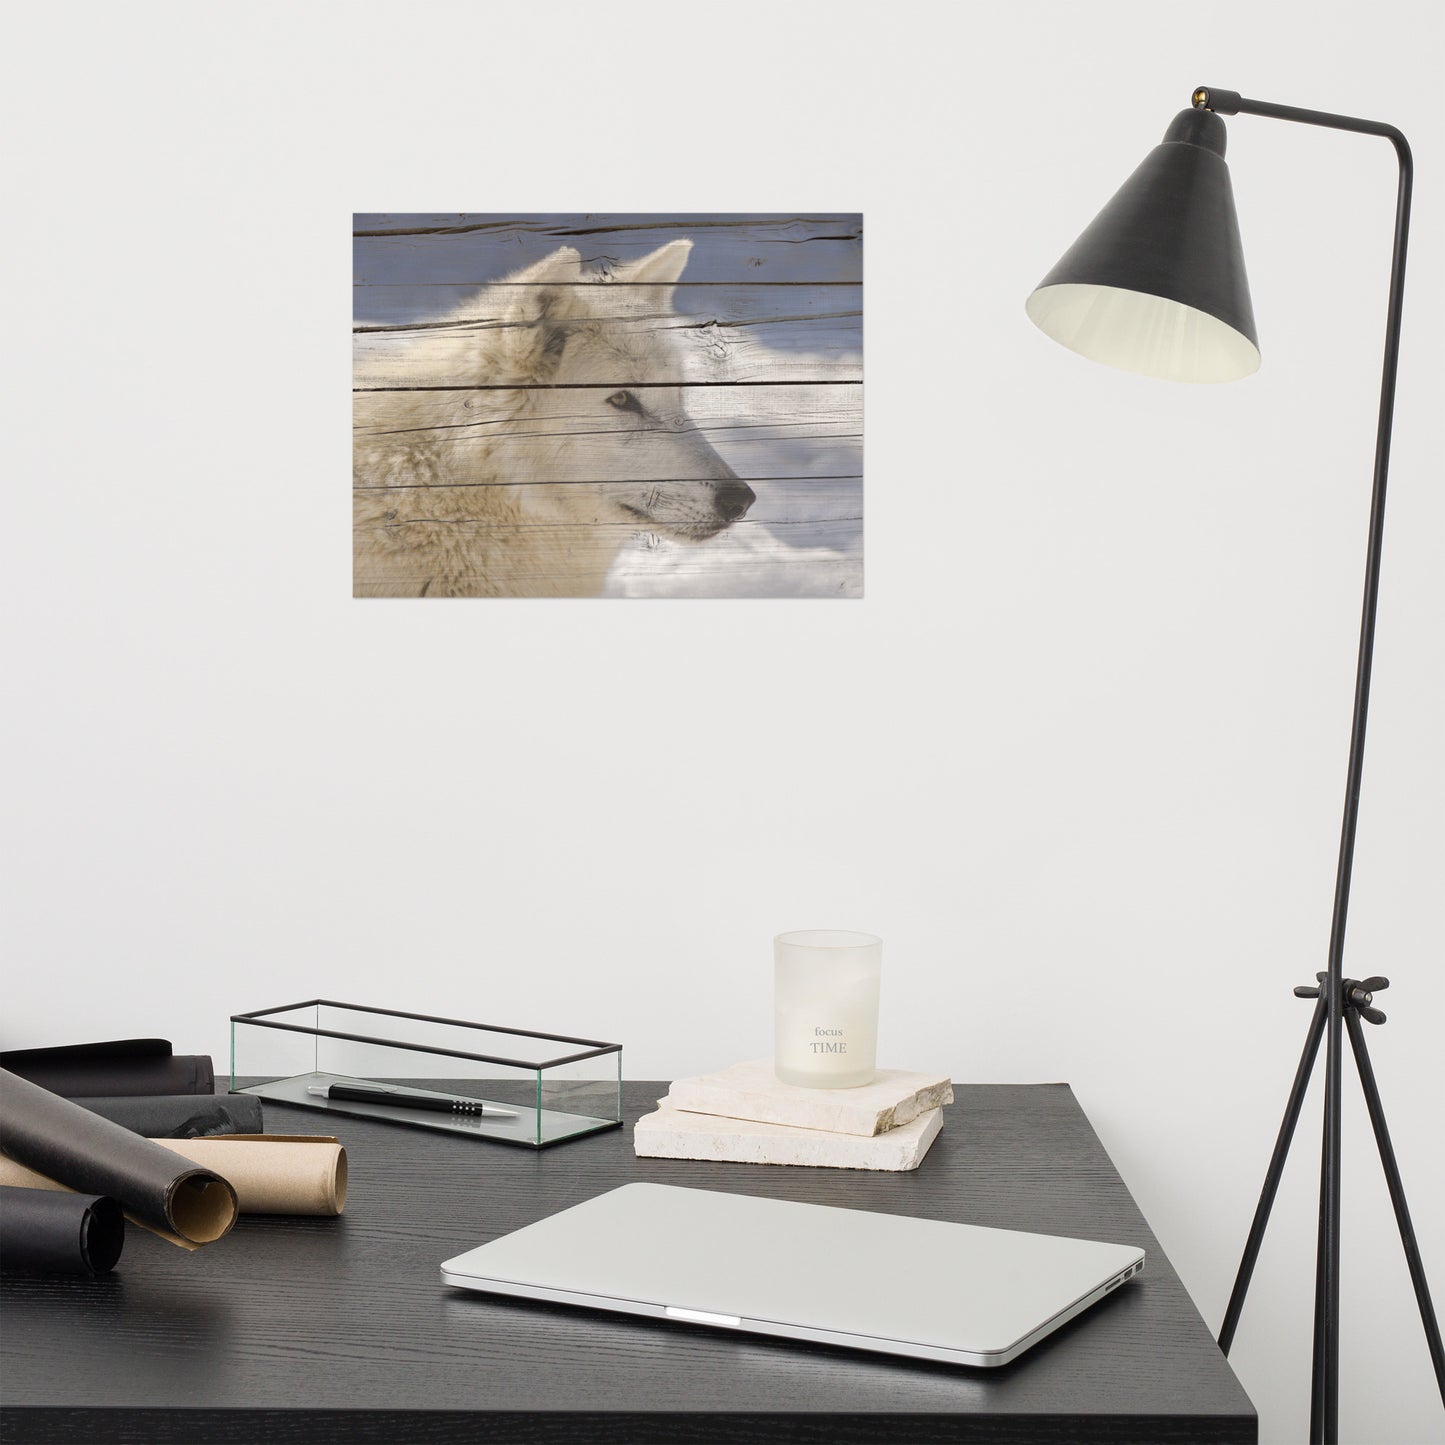 Cute Office Wall Art: Aries the White Wolf Portrait on Faux Weathered Wood Texture - Farmhouse / Country Style / Modern Wildlife / Animal Photographic Artwork